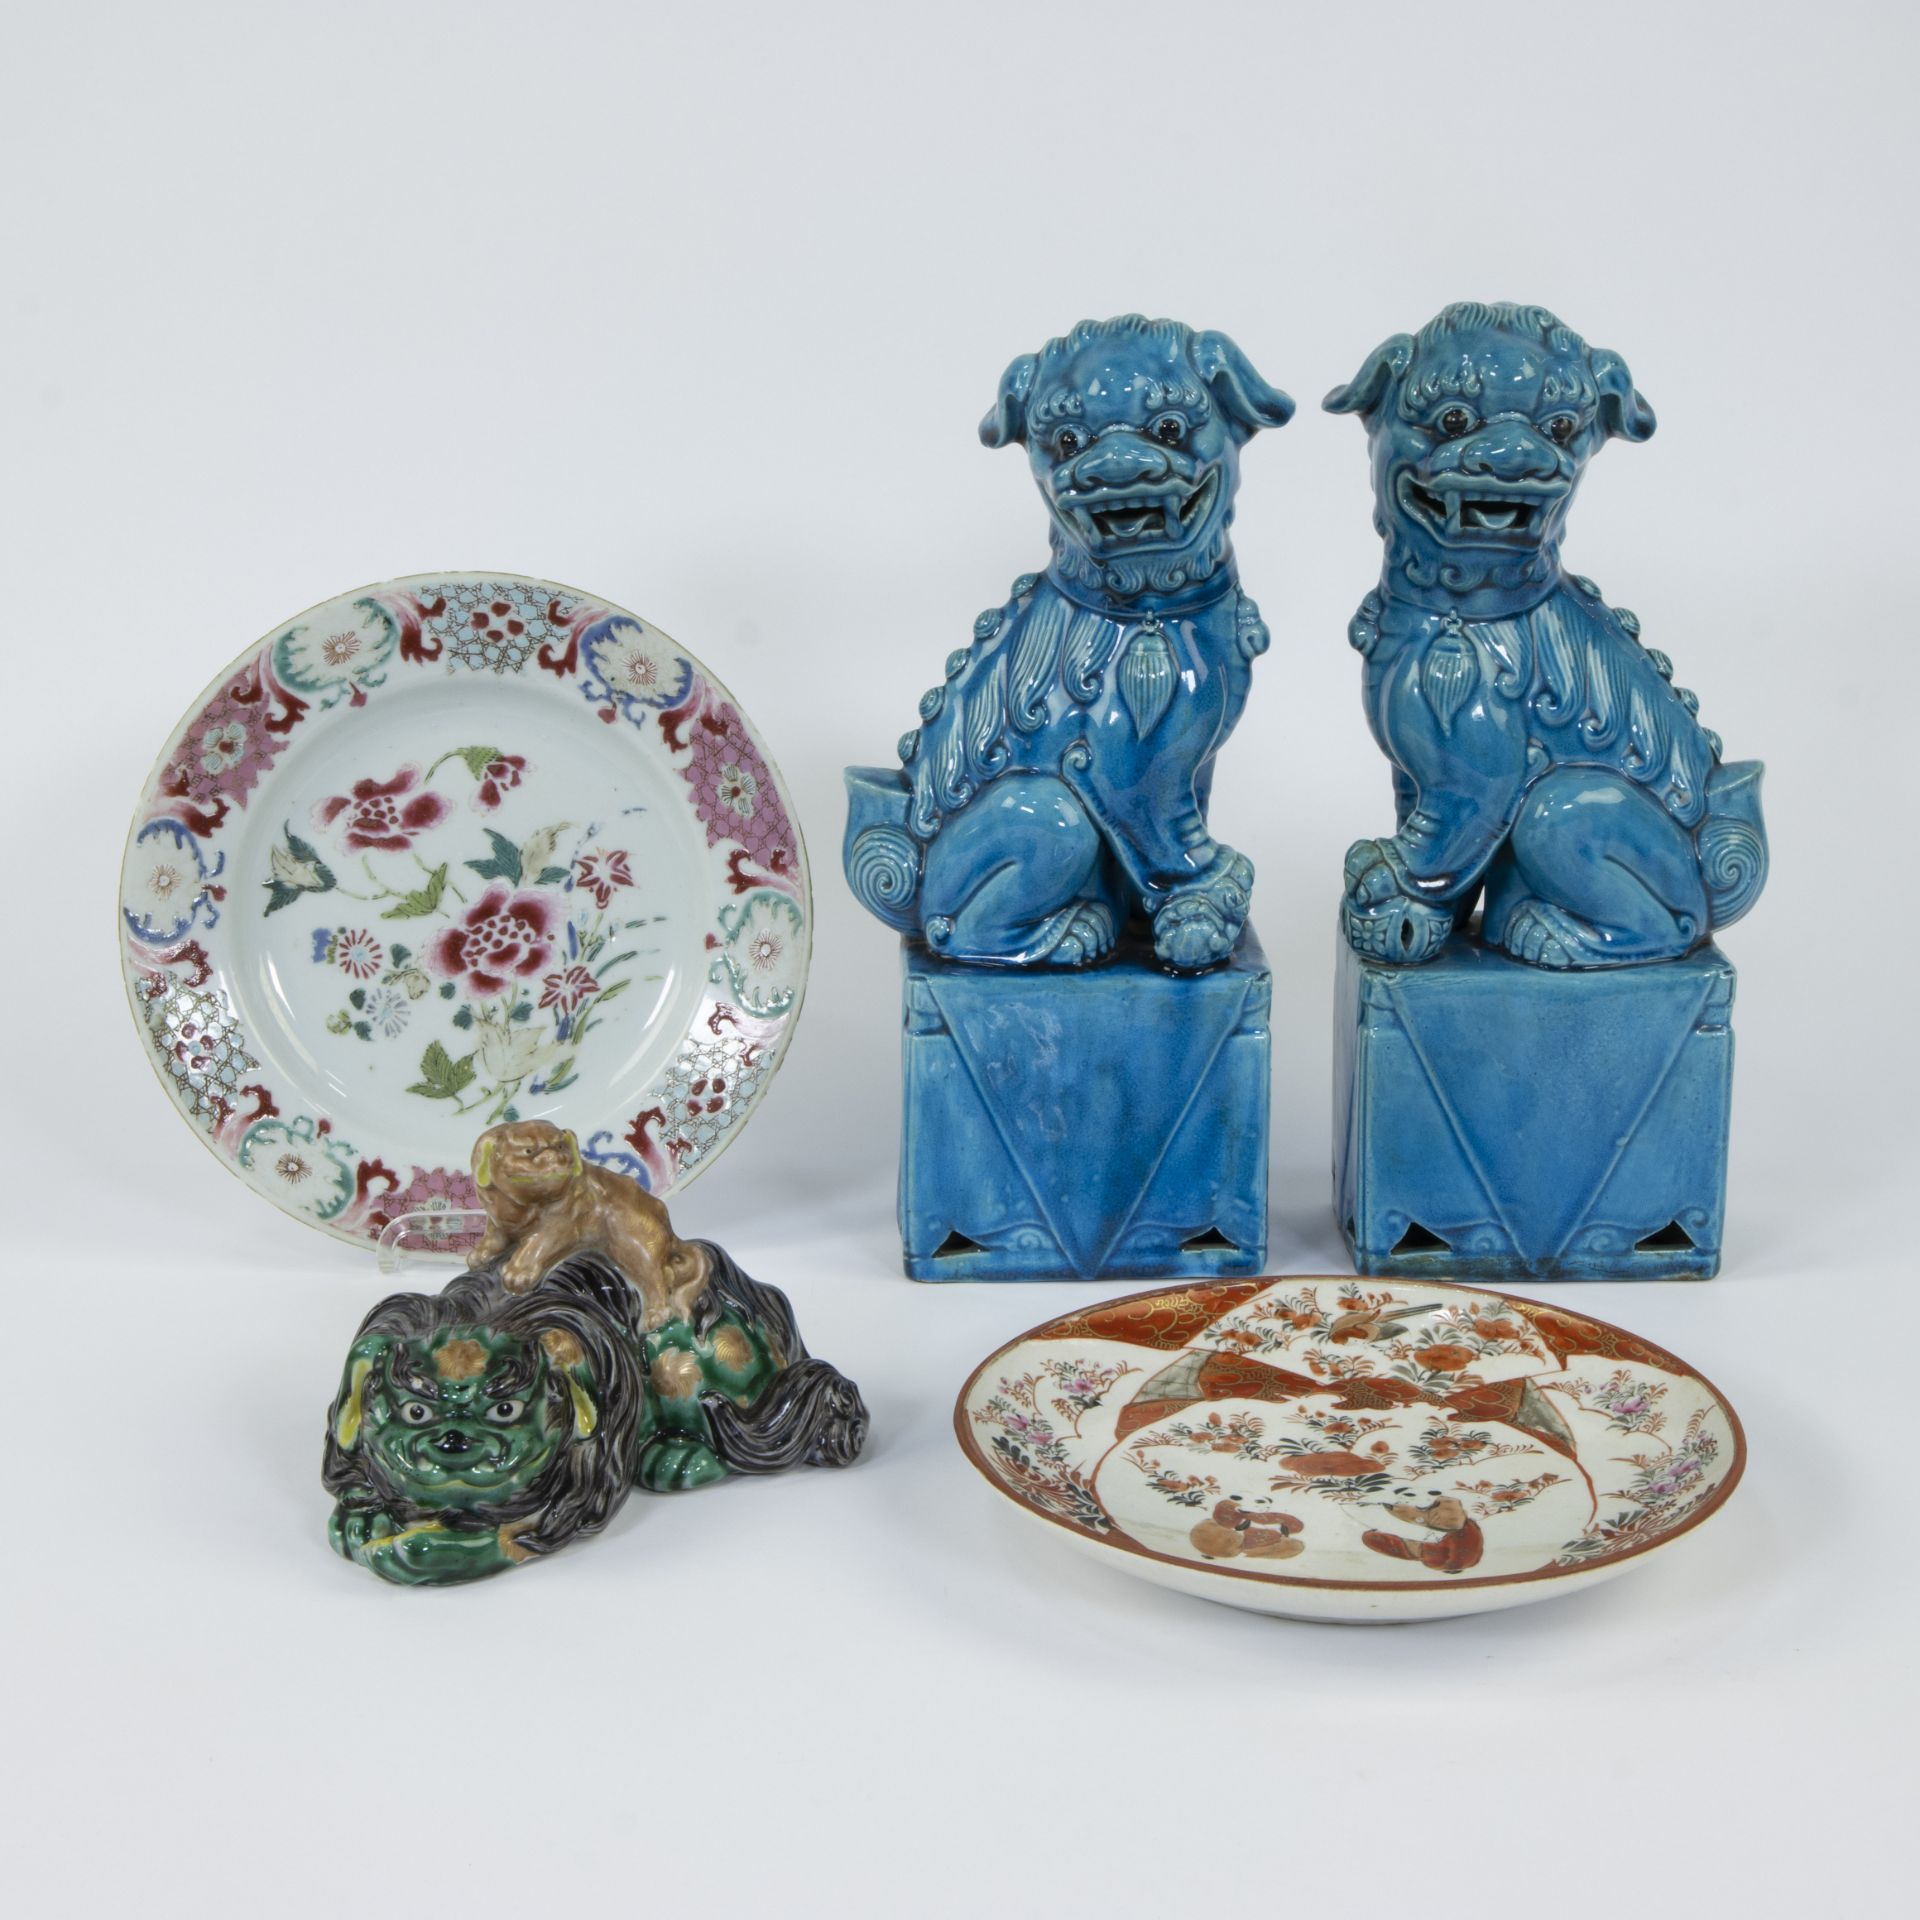 Various Chinese porcelain and pottery, famille rose plate 18th century, pair of blue glazed Chien Fo